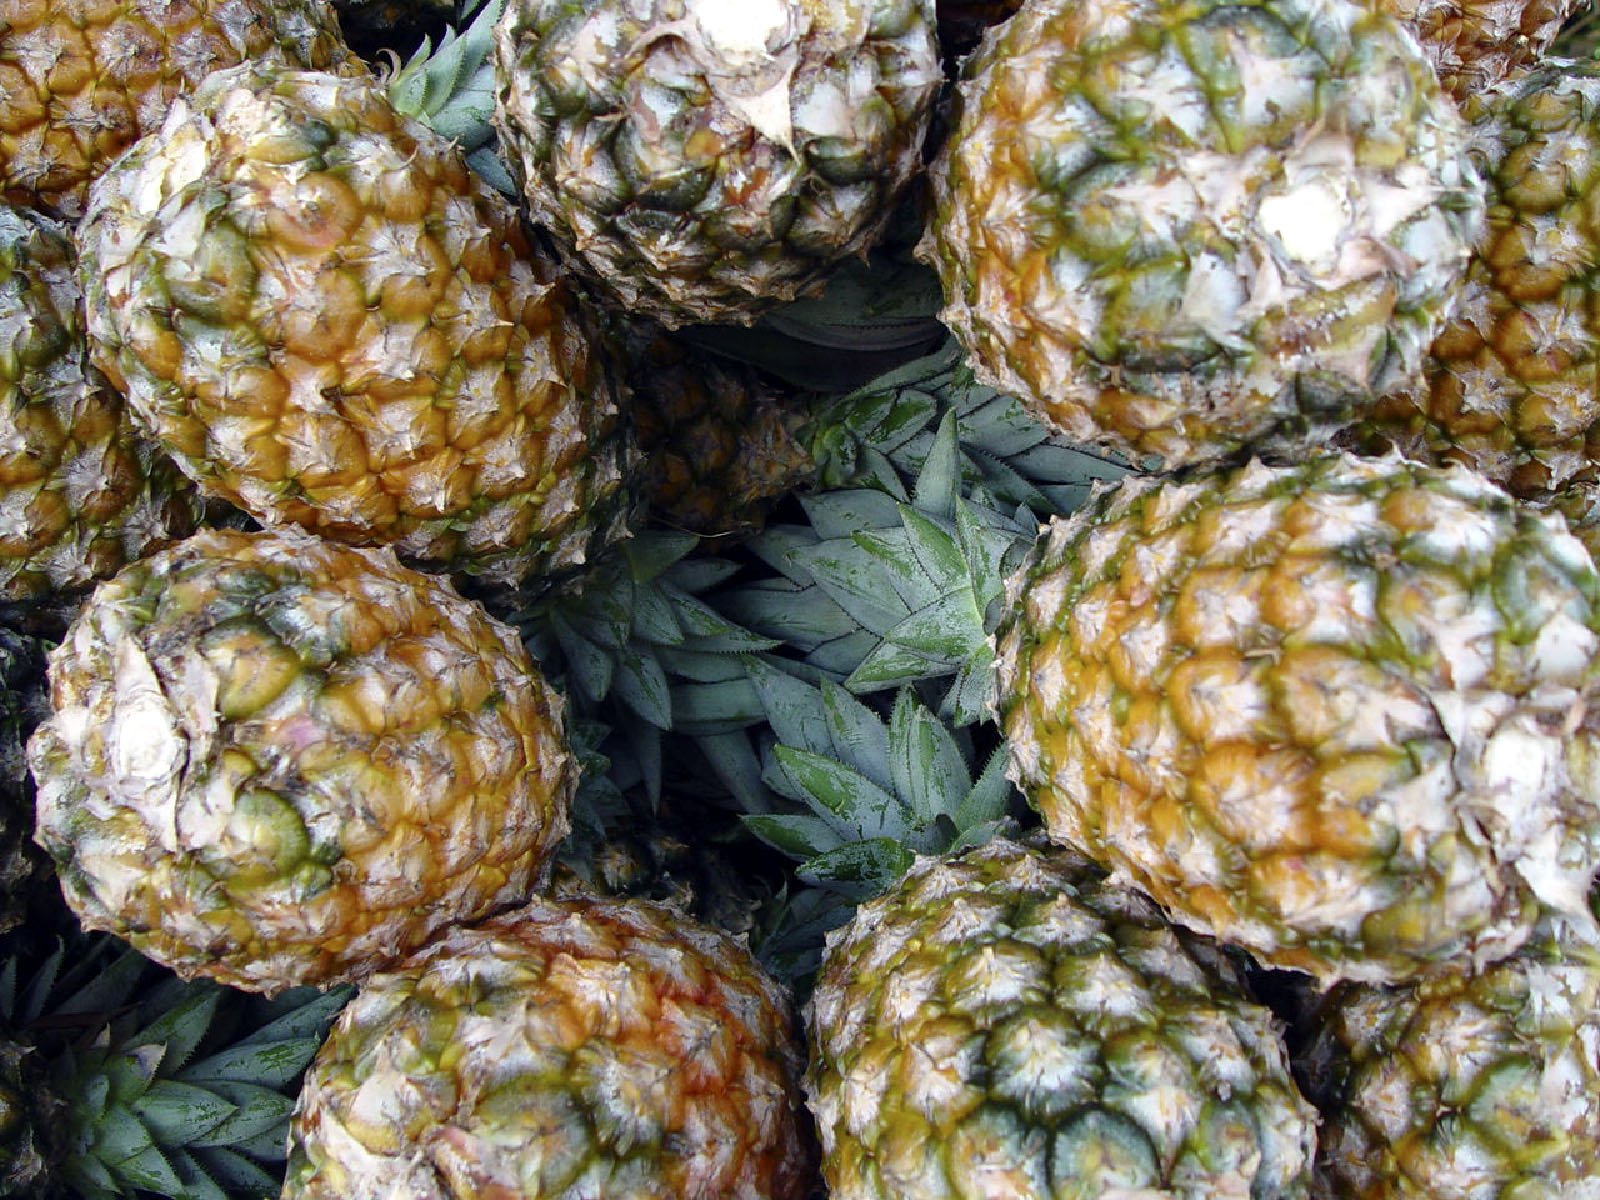 pineapples are piled together in piles to be eaten